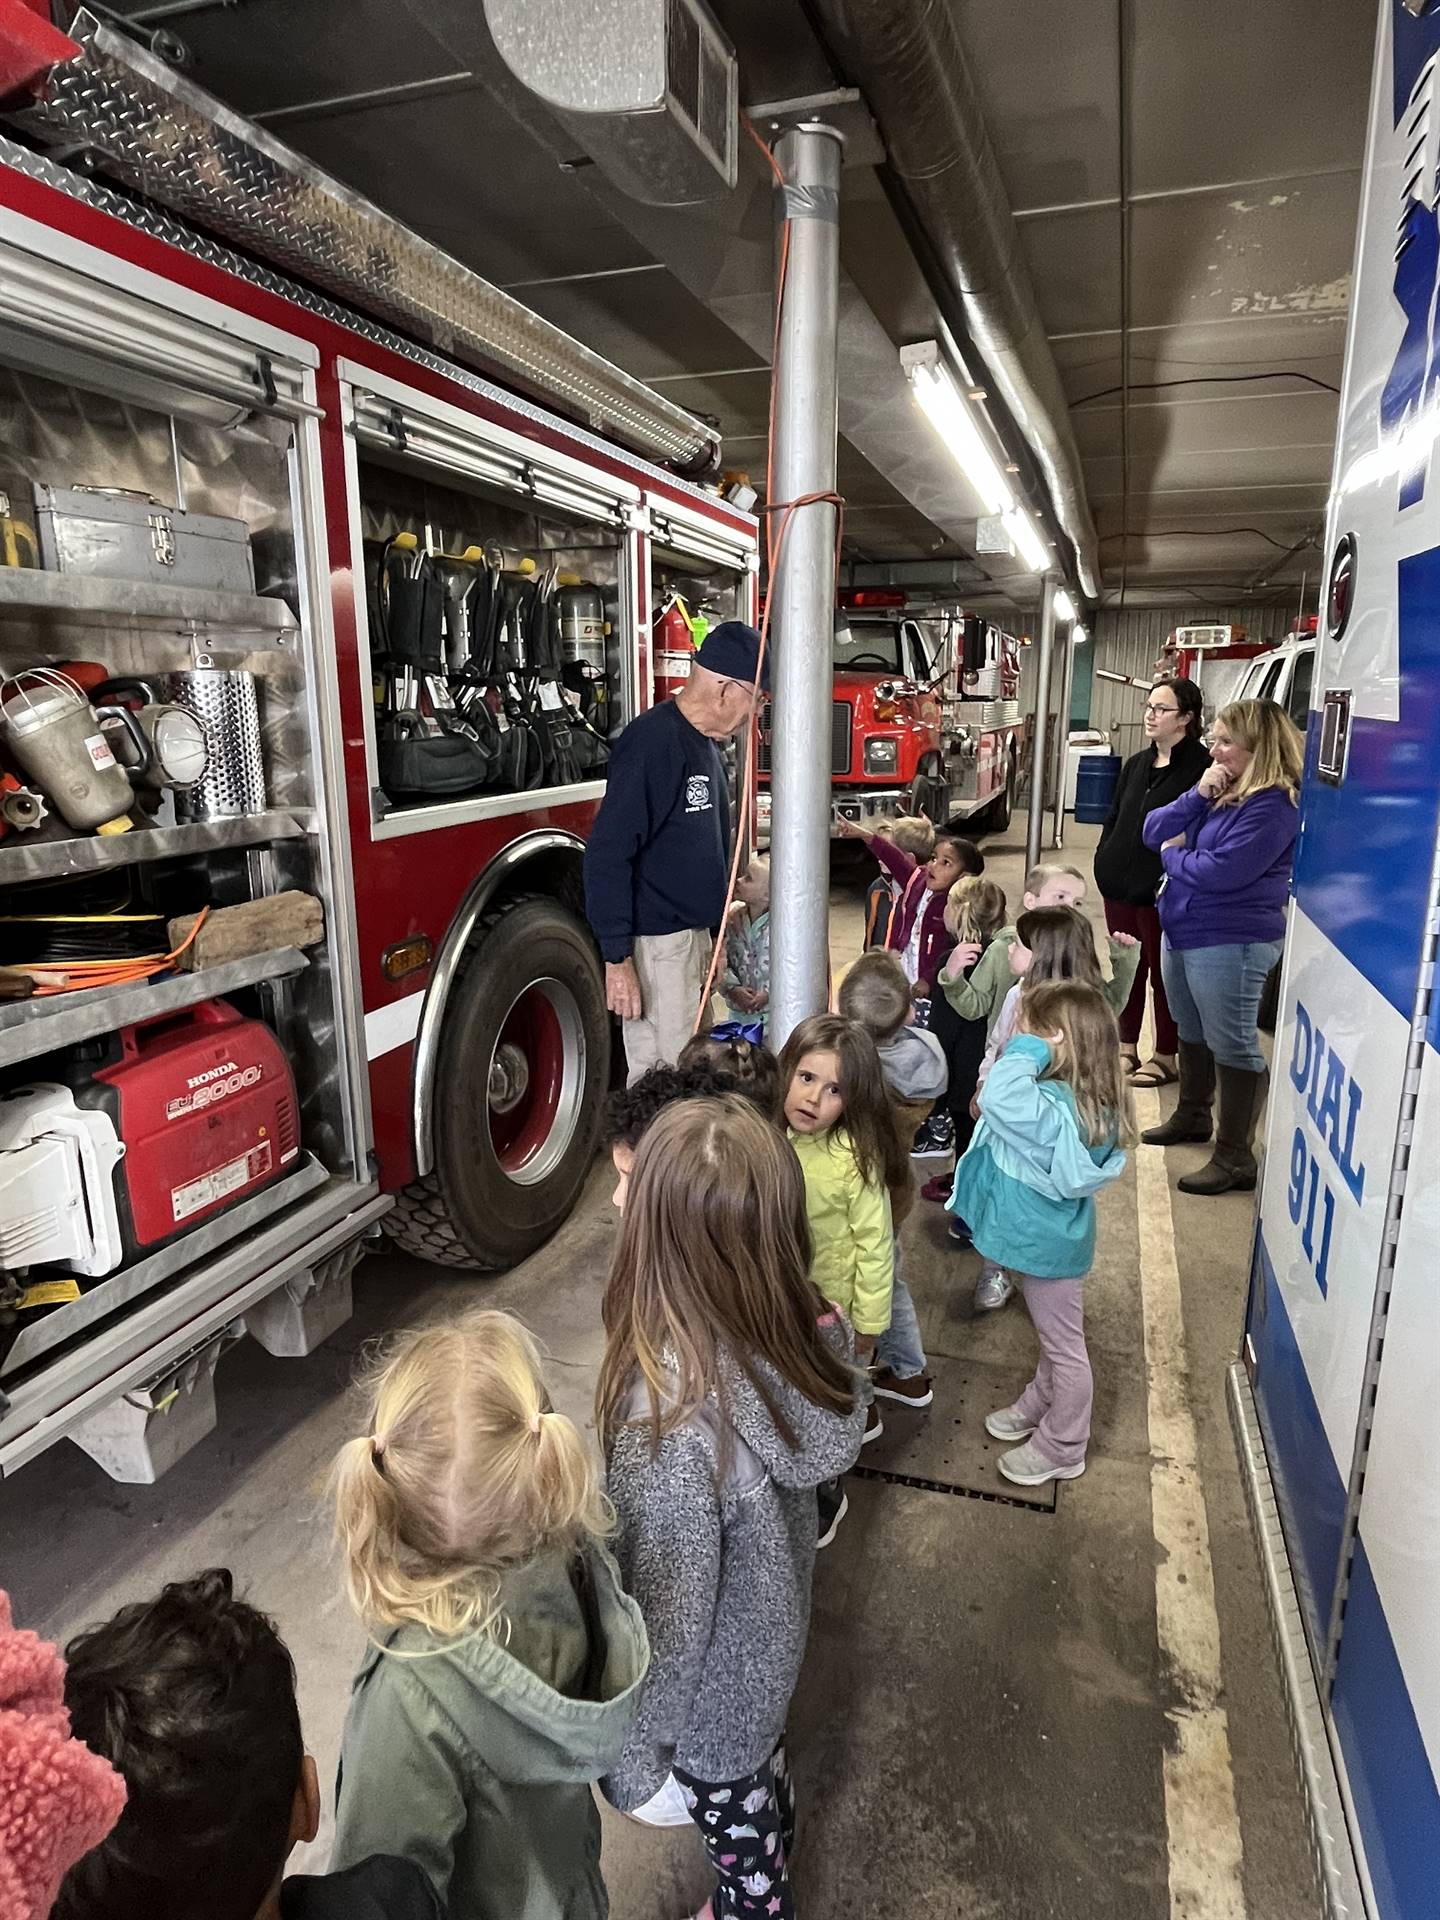 Firefighter tells students about the equipment found on a firetruck